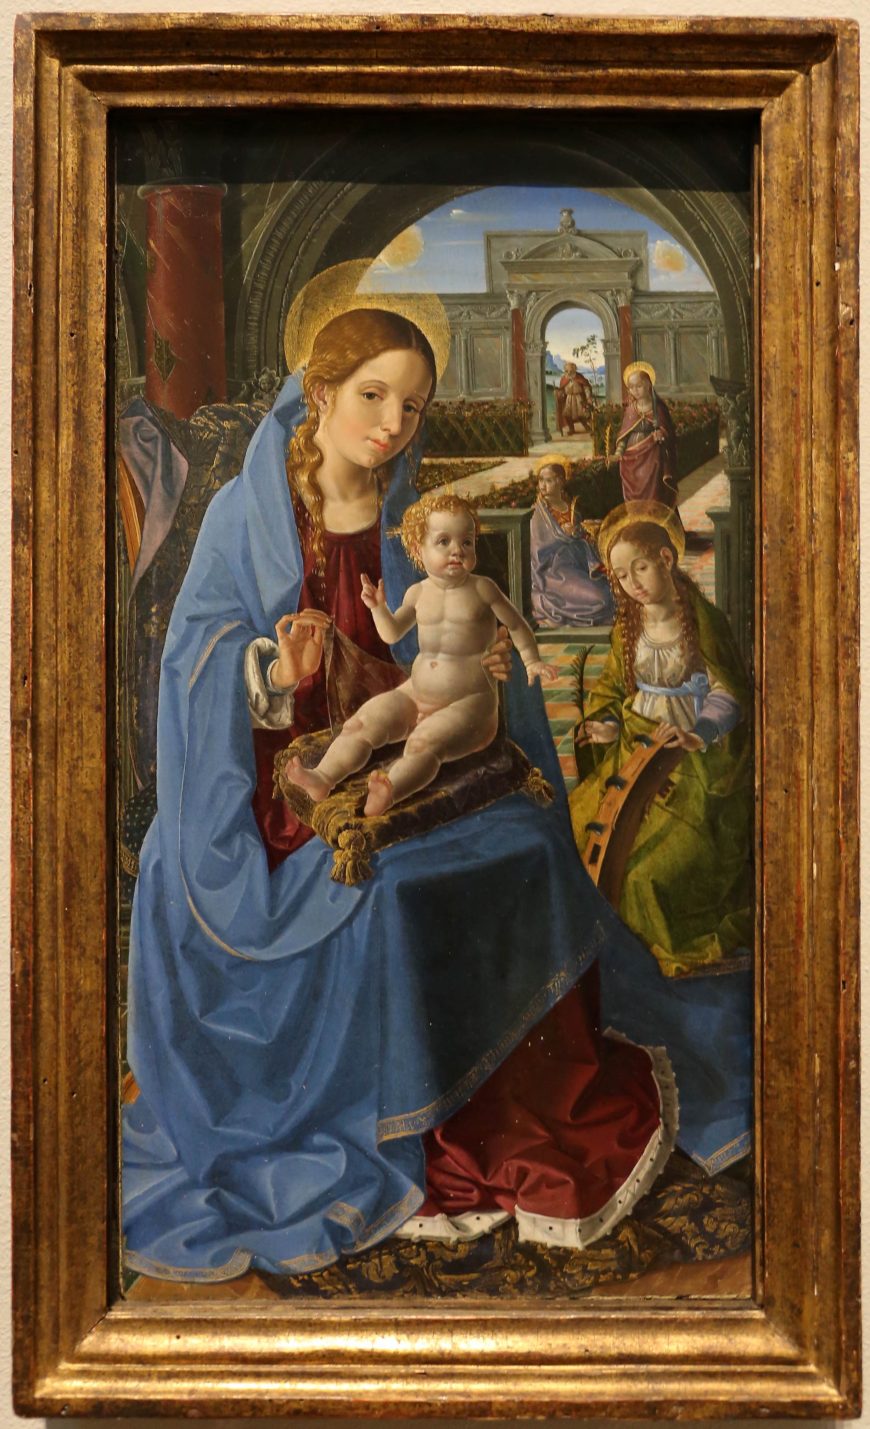 Paolo da San Leocadio, Madonna and Child with Saints, 1485, oil on panel (National Gallery, London)